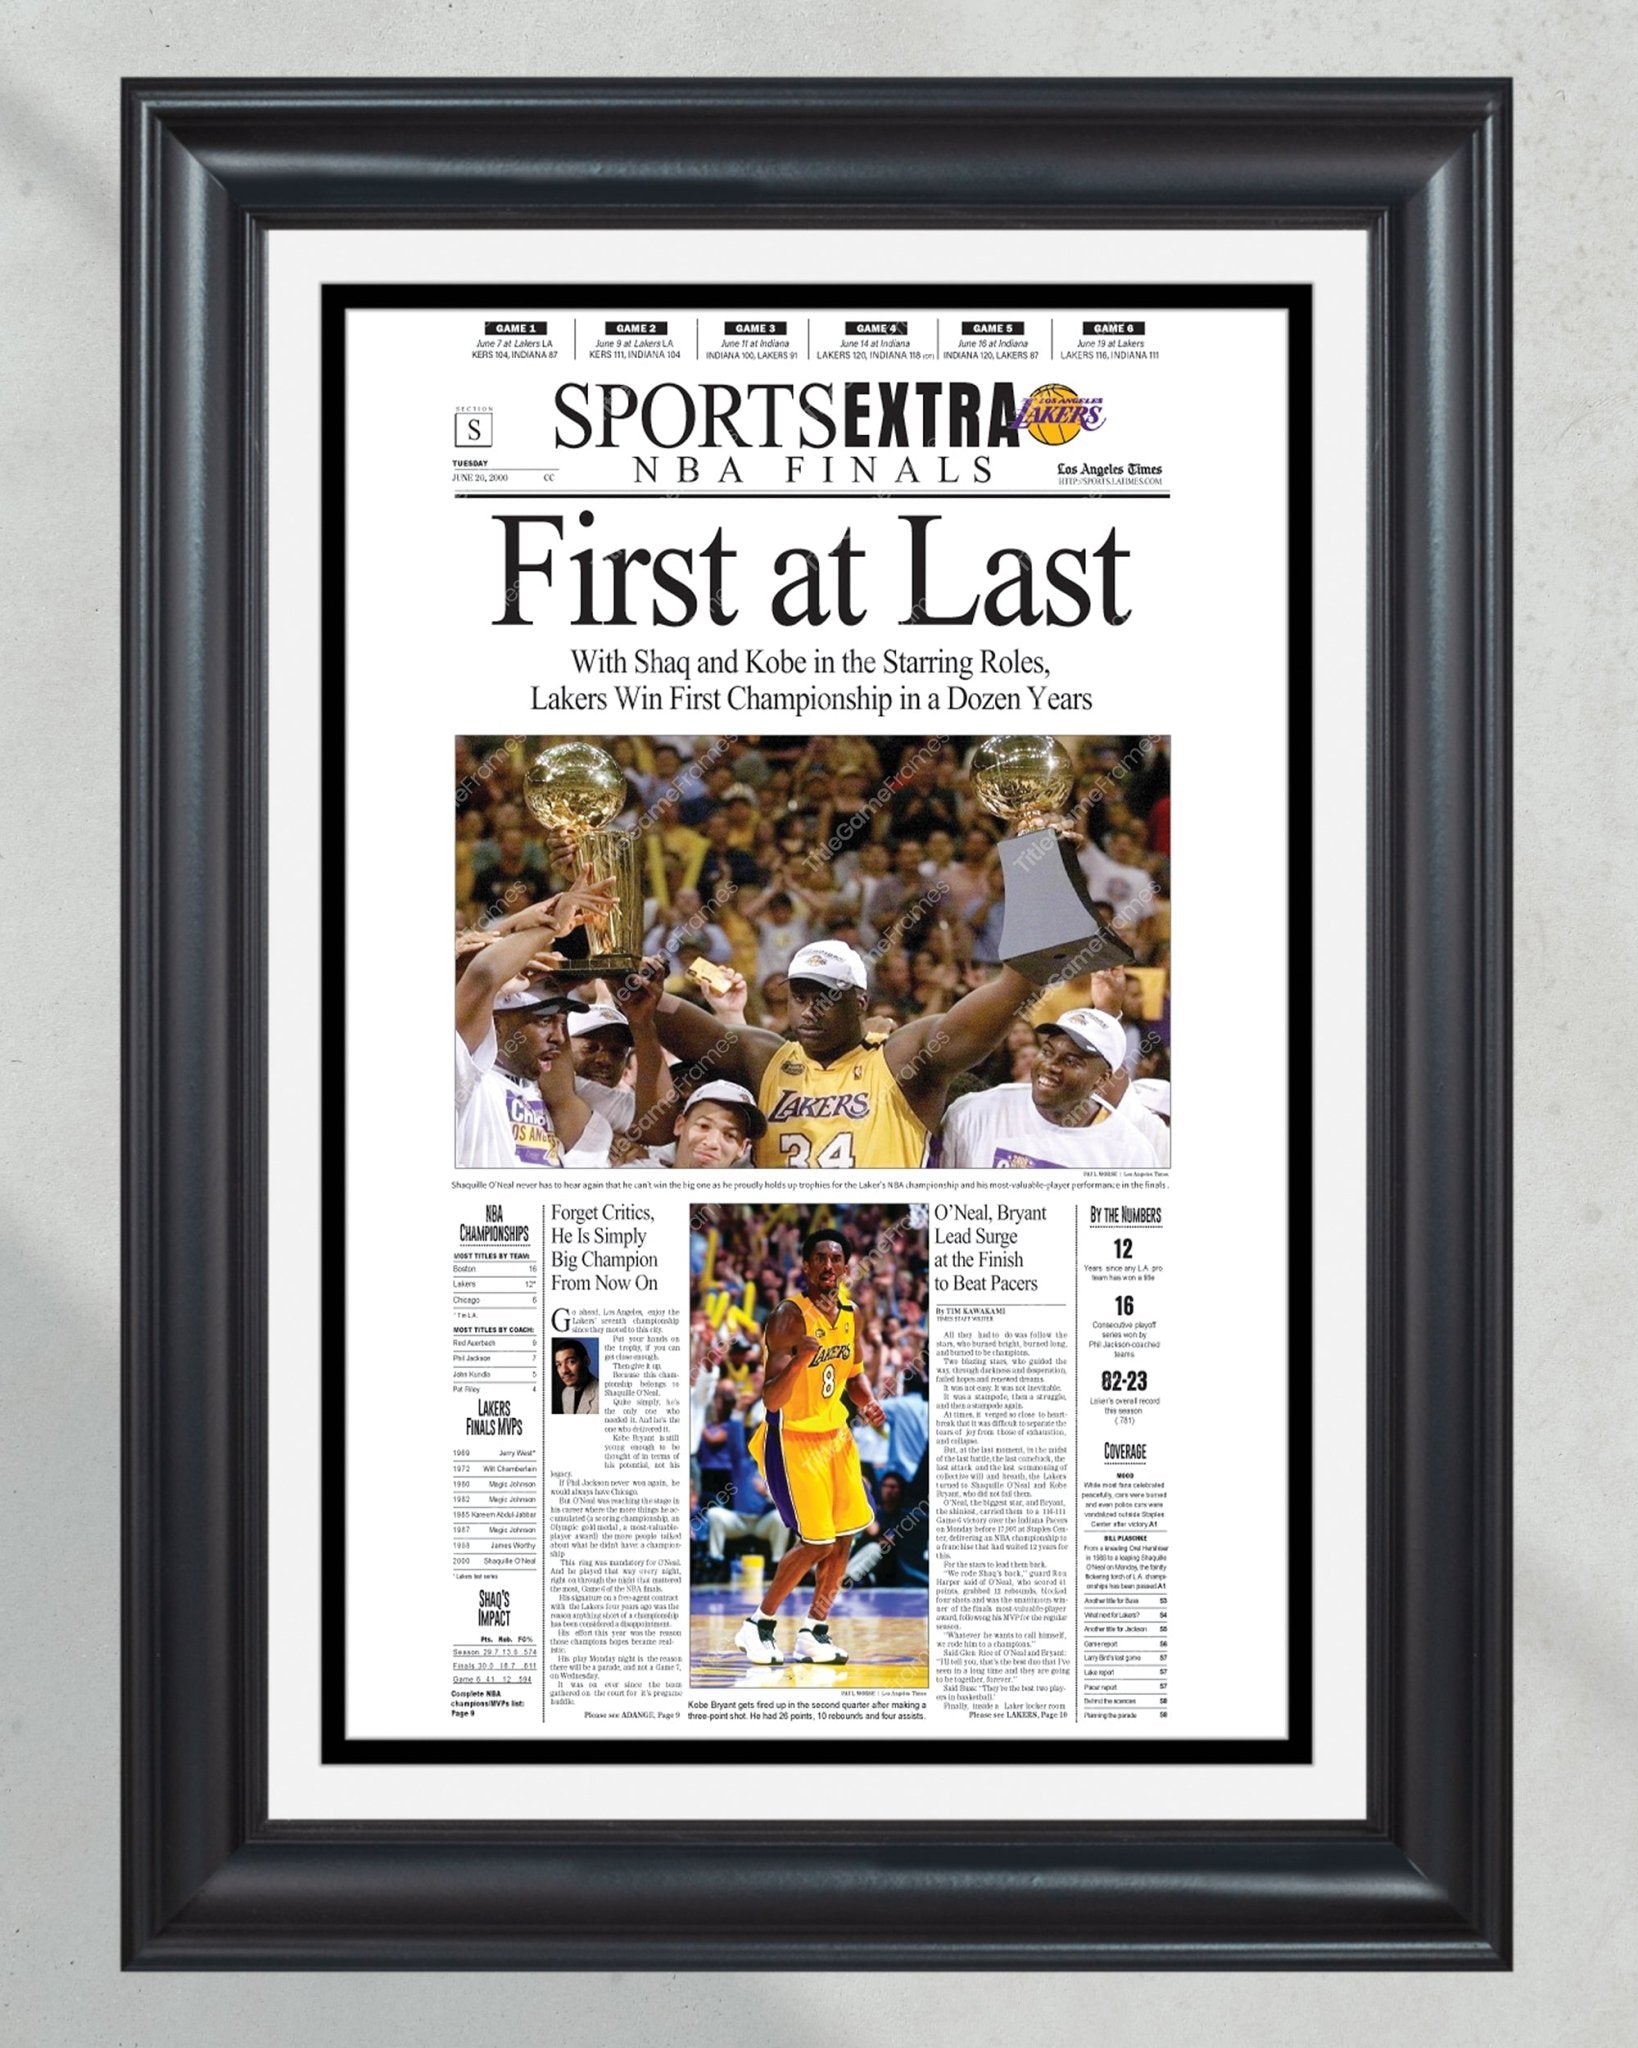 2000 Los Angeles Lakers NBA Champions Framed Newspaper Front Page Newspaper Print Kobe and Shaq Staples Center - Title Game Frames